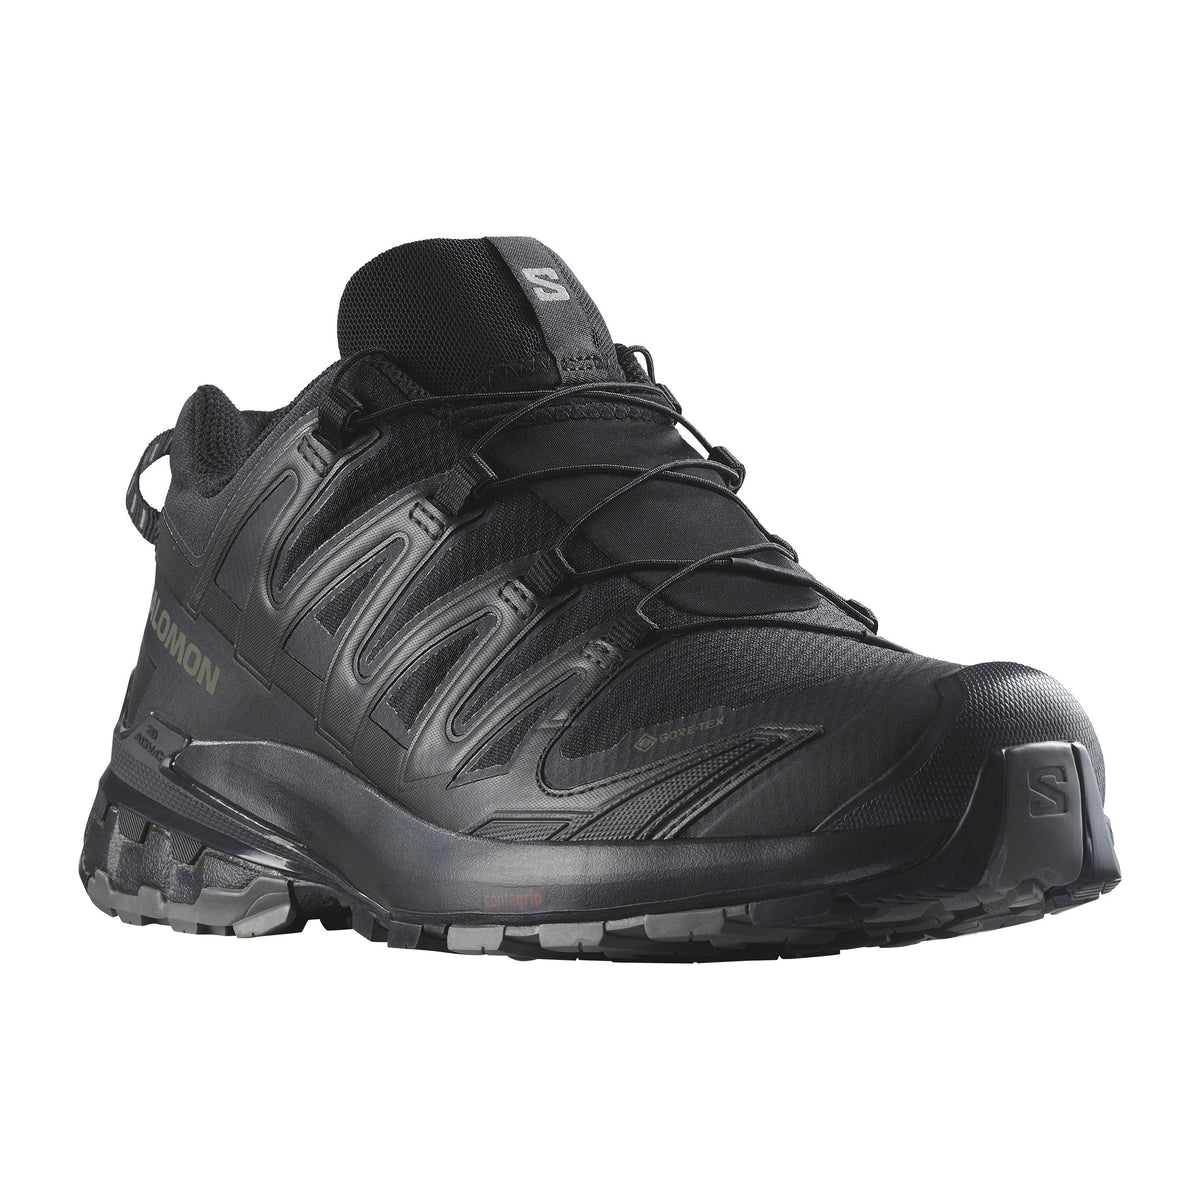 Side view of a black Salomon XA Pro 3D V9 GTX hiking boot with gray accents and rugged Gore-Tex sole.